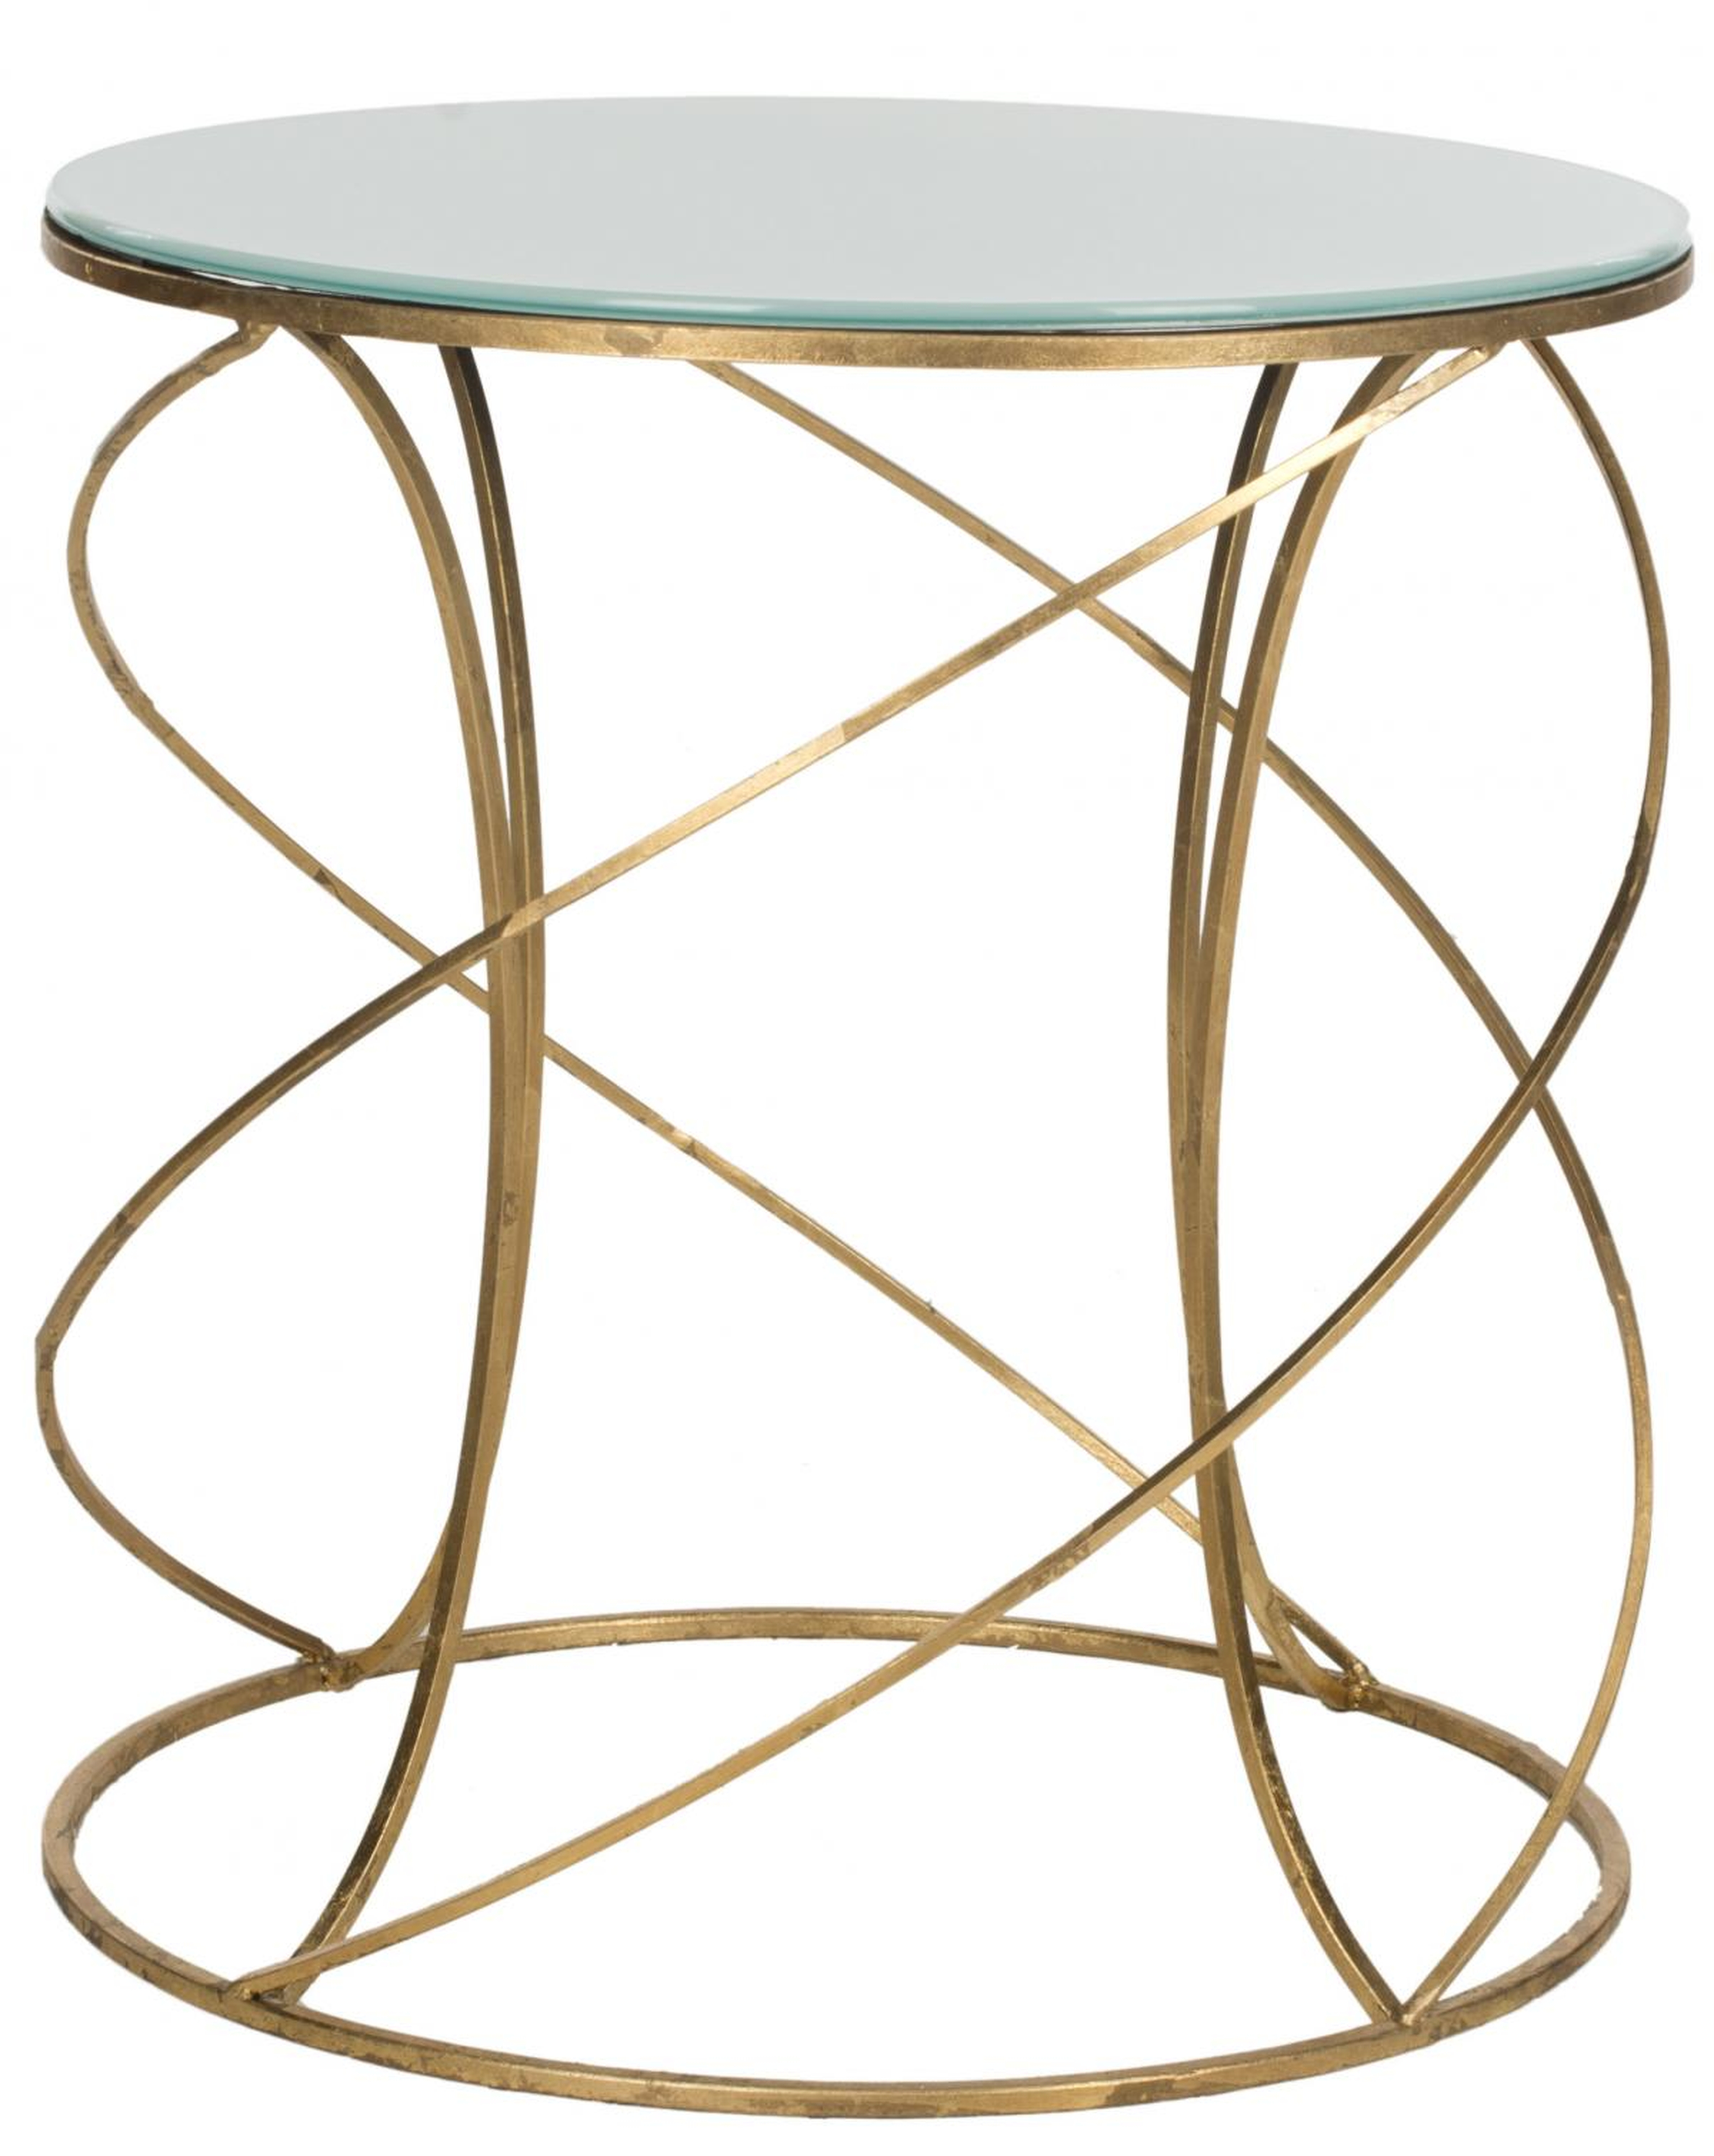 Cagney Glass Top Round Accent Table - Gold/White - Arlo Home - Arlo Home